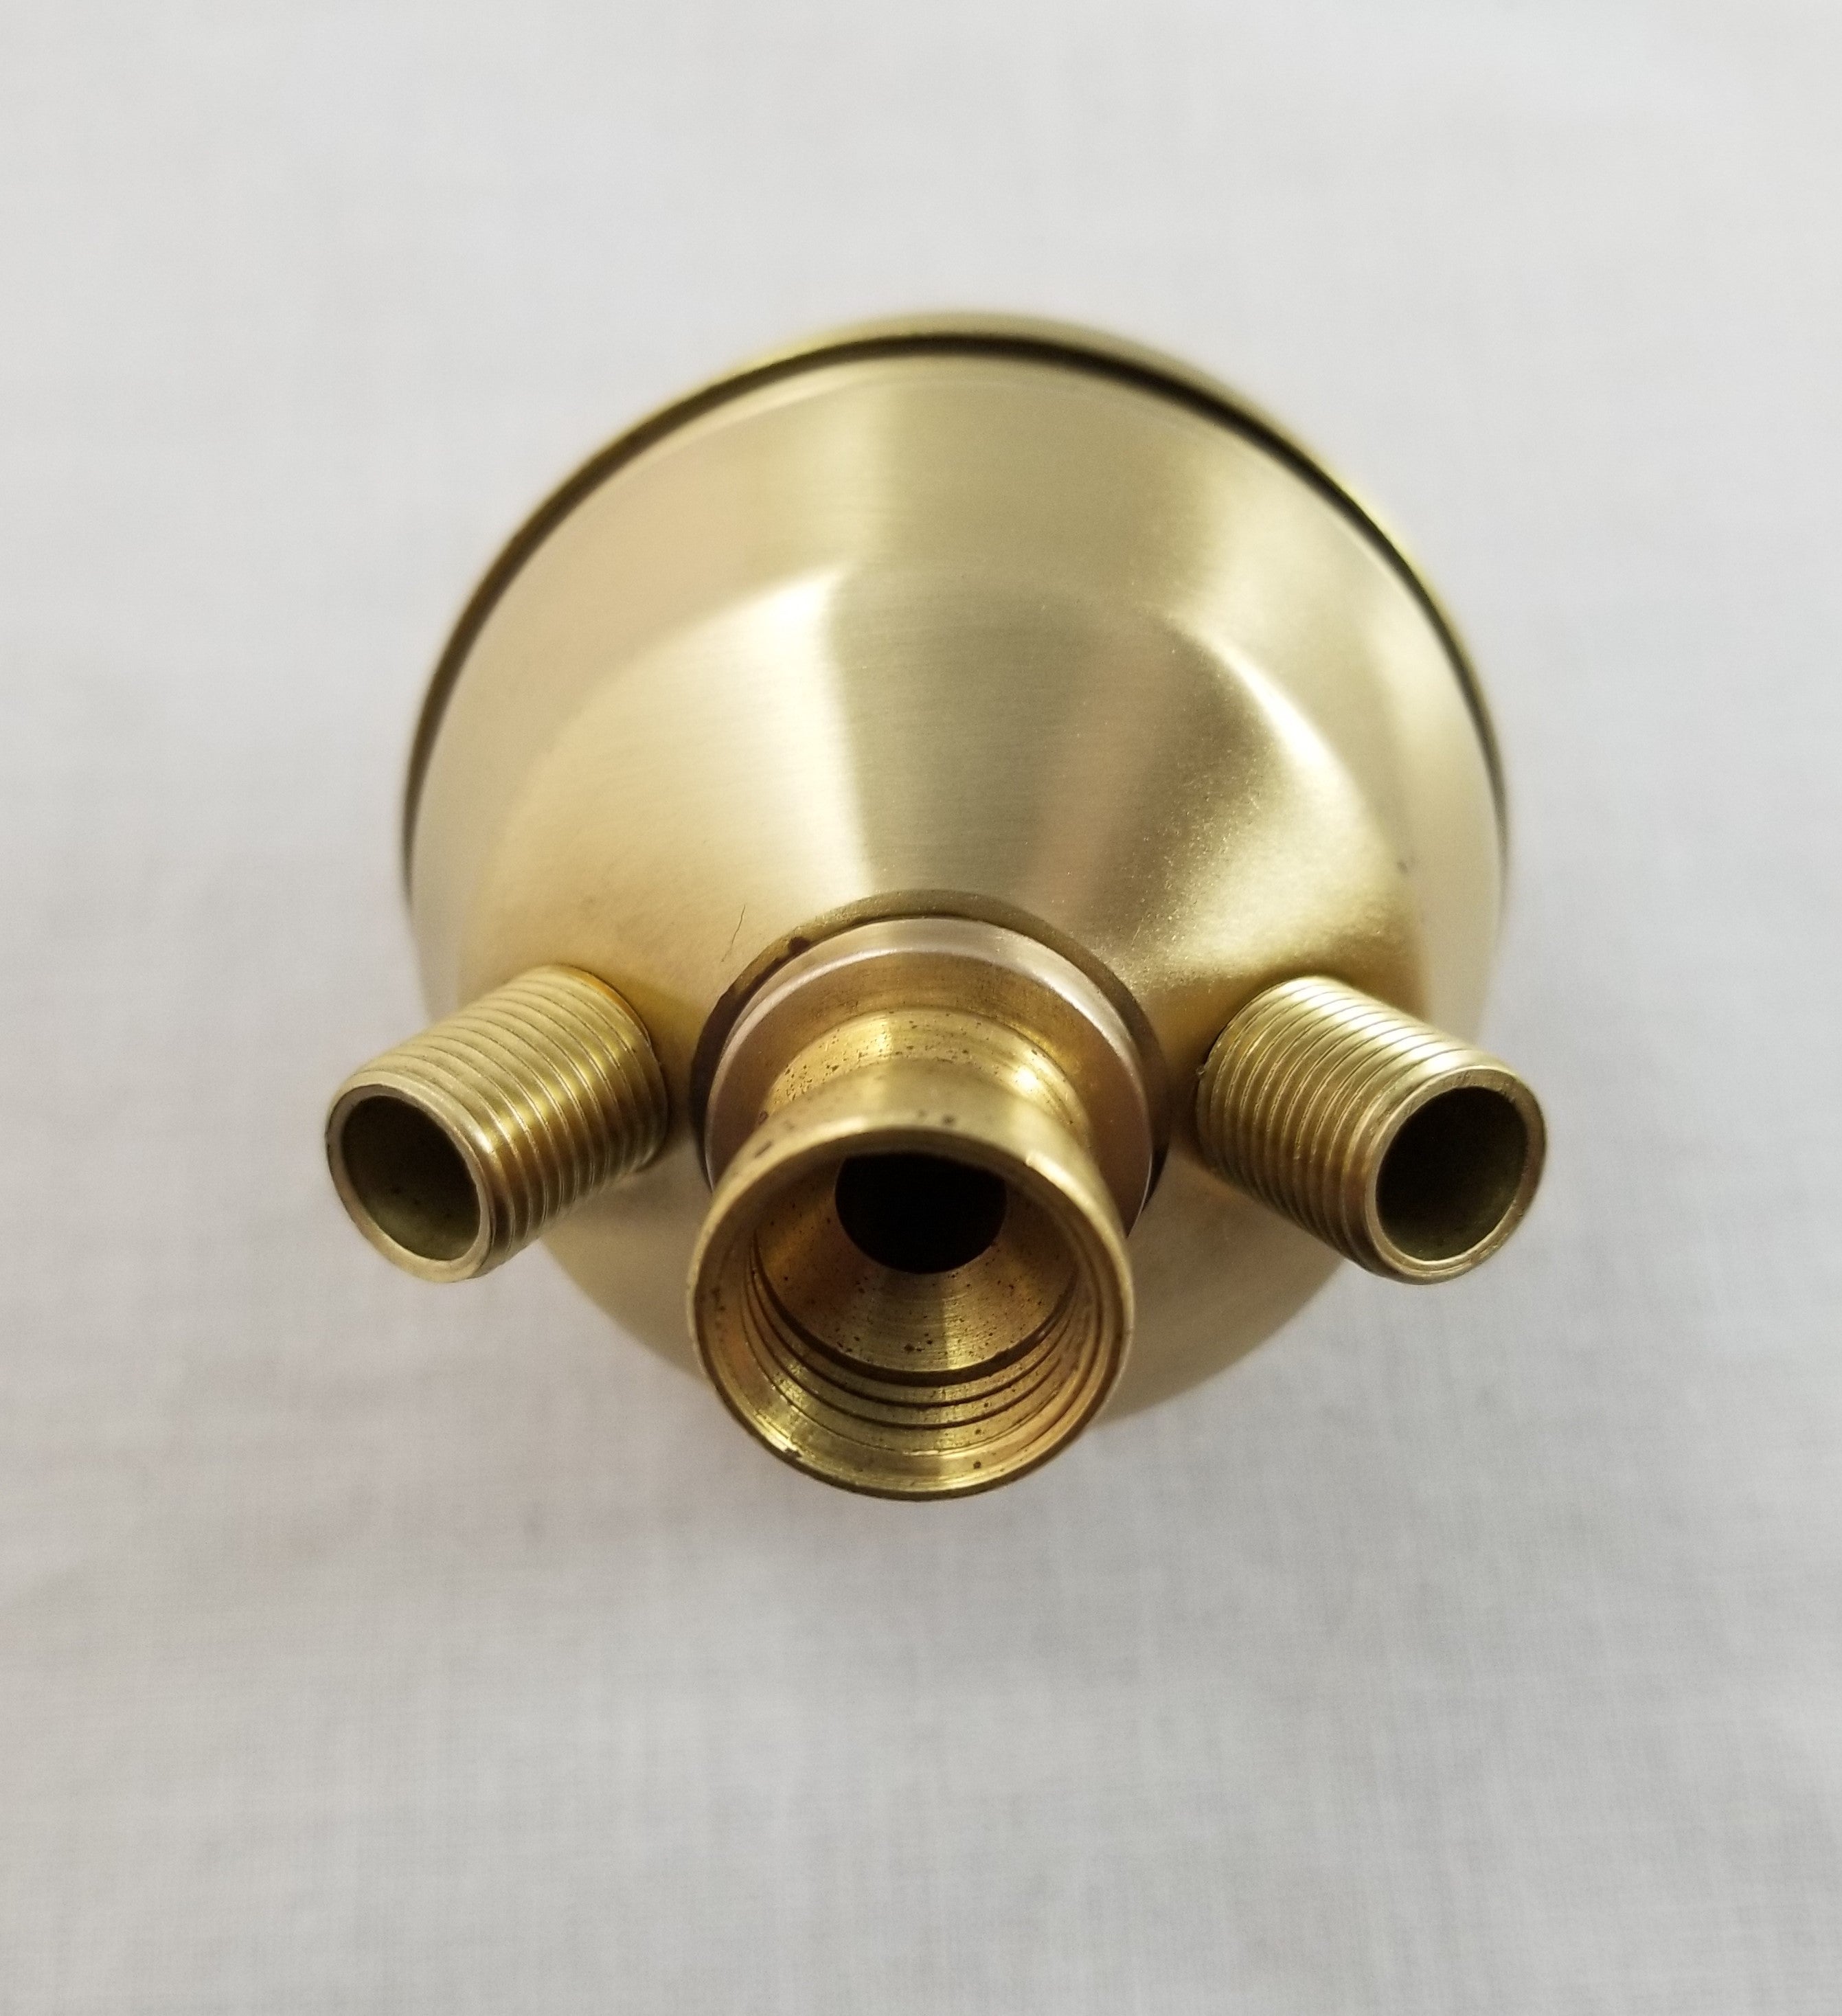 Cluster Head - Solid Brushed Brass - Bottom Tapped 1/4 IP - With Finial